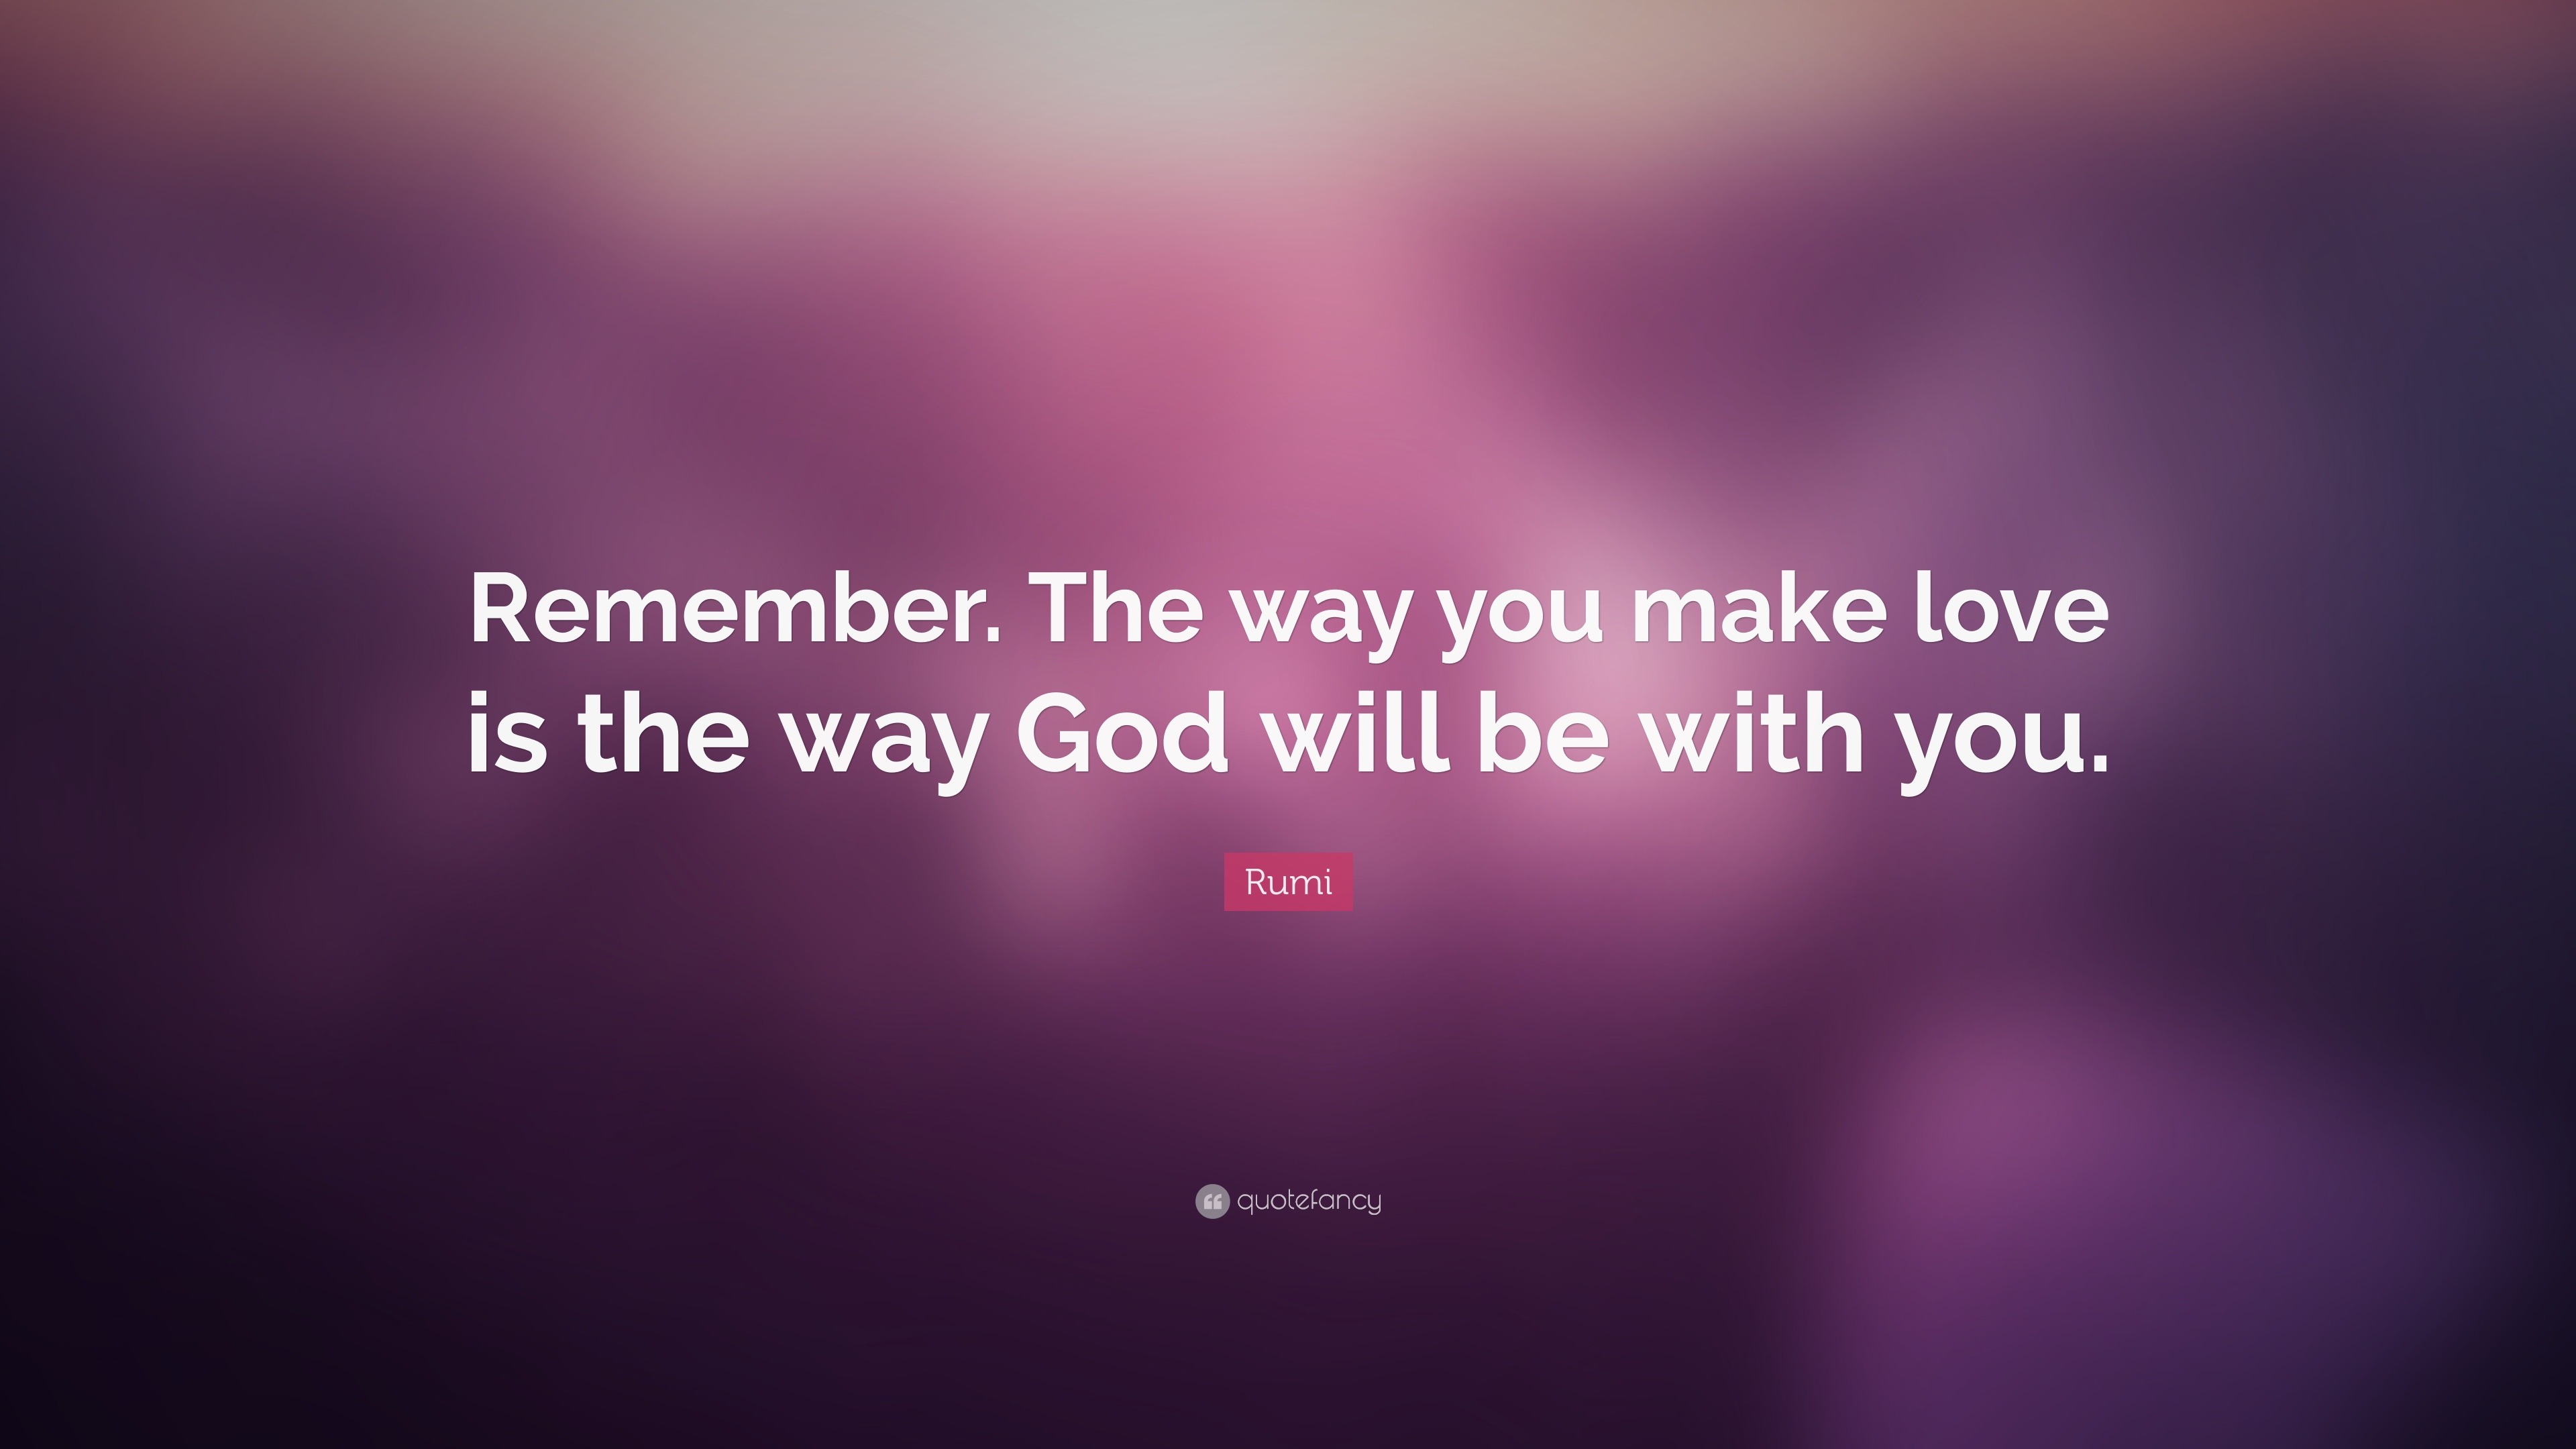 Rumi Quote “Remember The way you make love is the way God will